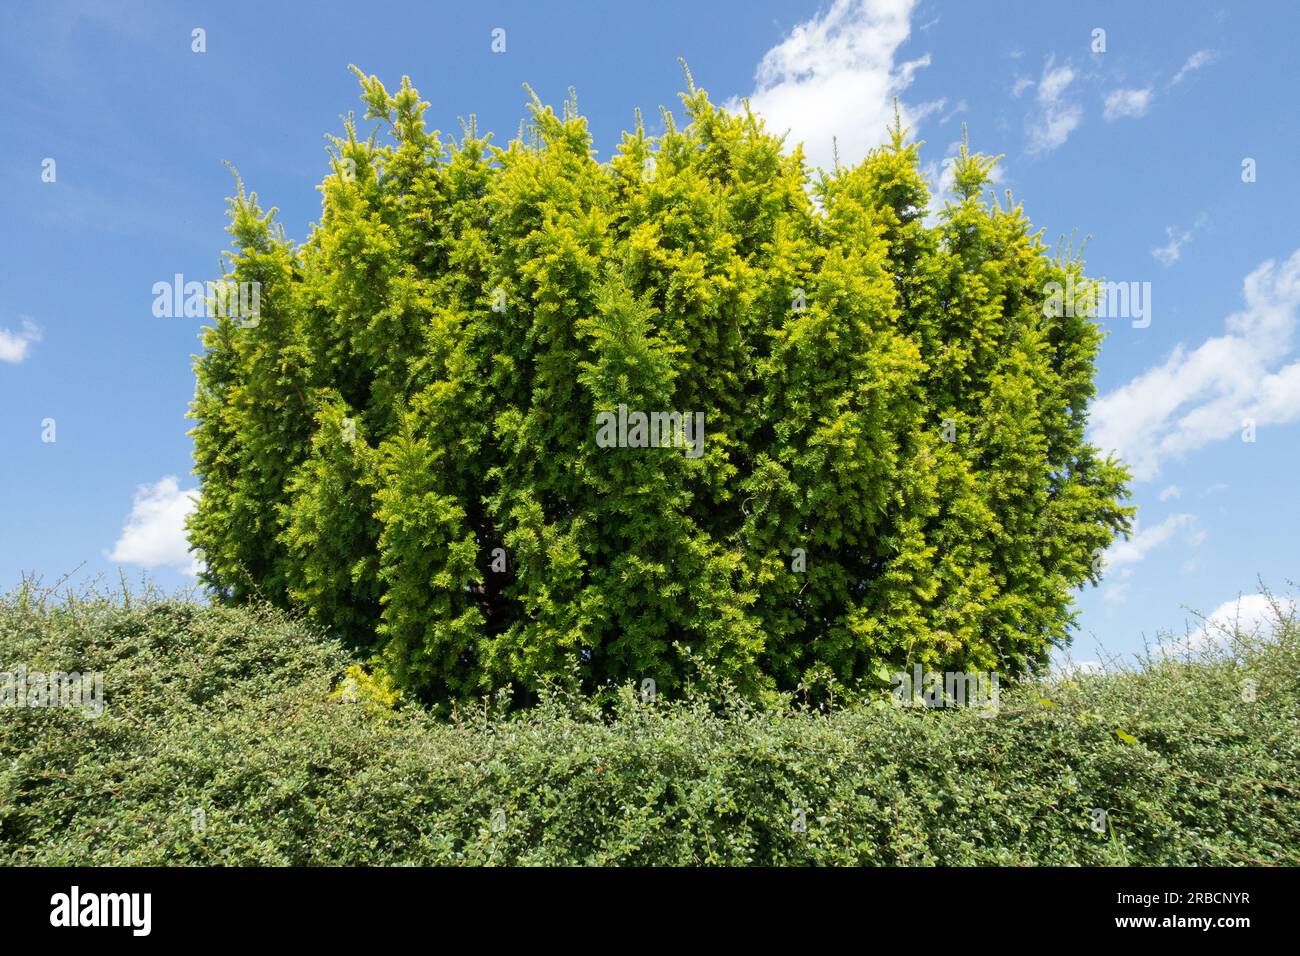 Taxus baccata Tree English Yew and Cotoneaster hedge Yew tree Taxus baccata Stock Photo